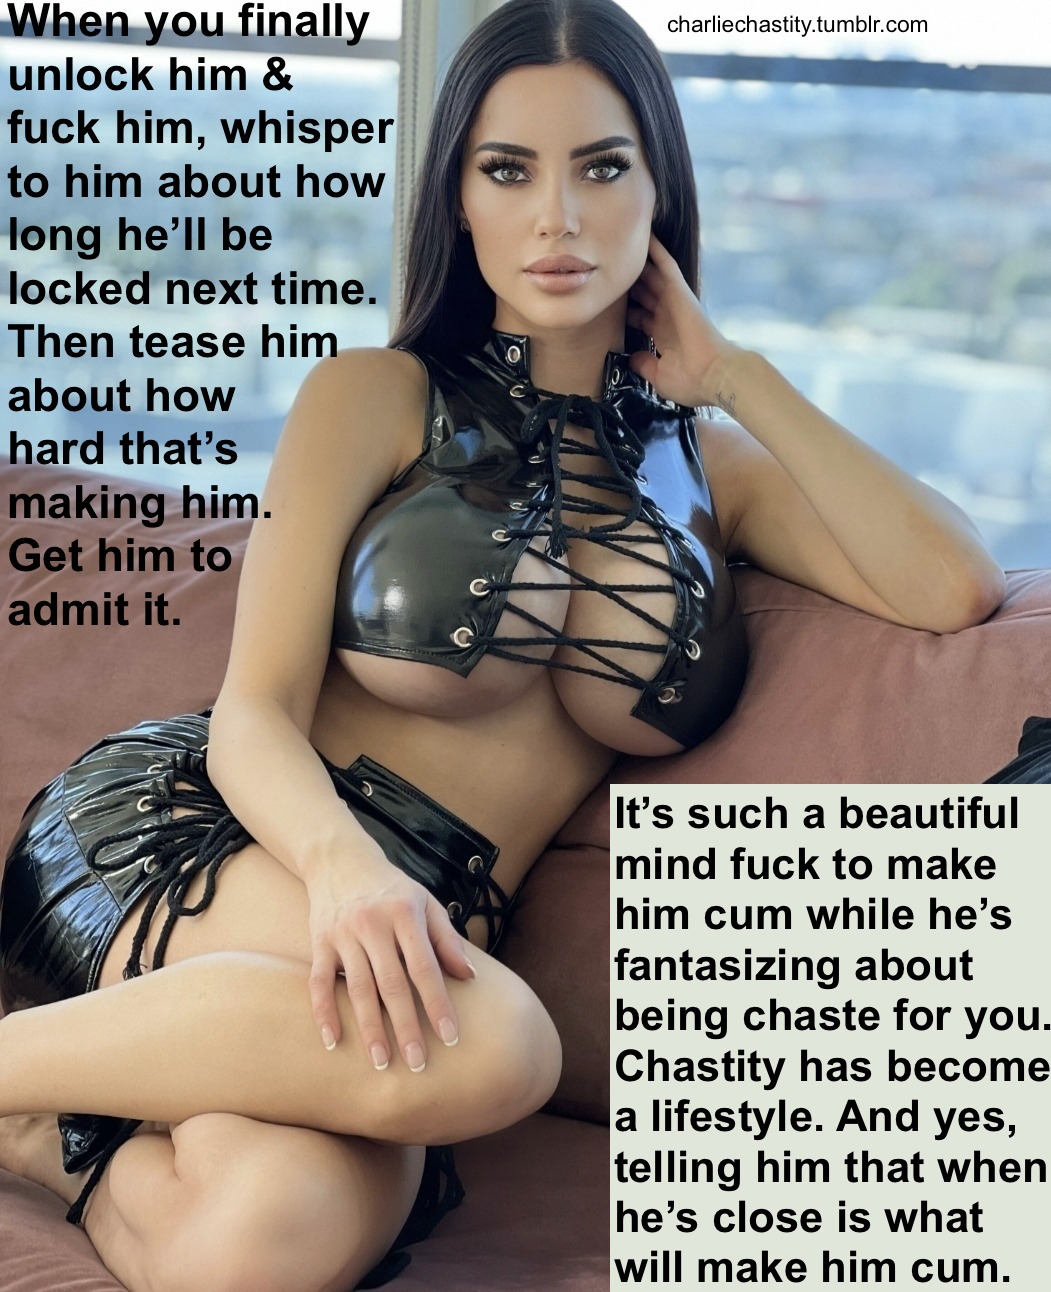 charliechastity:When you finally unlock him & fuck him, whisper to him about how long he’ll be locked next time. Then tease him about how hard that’s making him. Get him to admit it.It’s such a beautiful mind fuck to make him cum